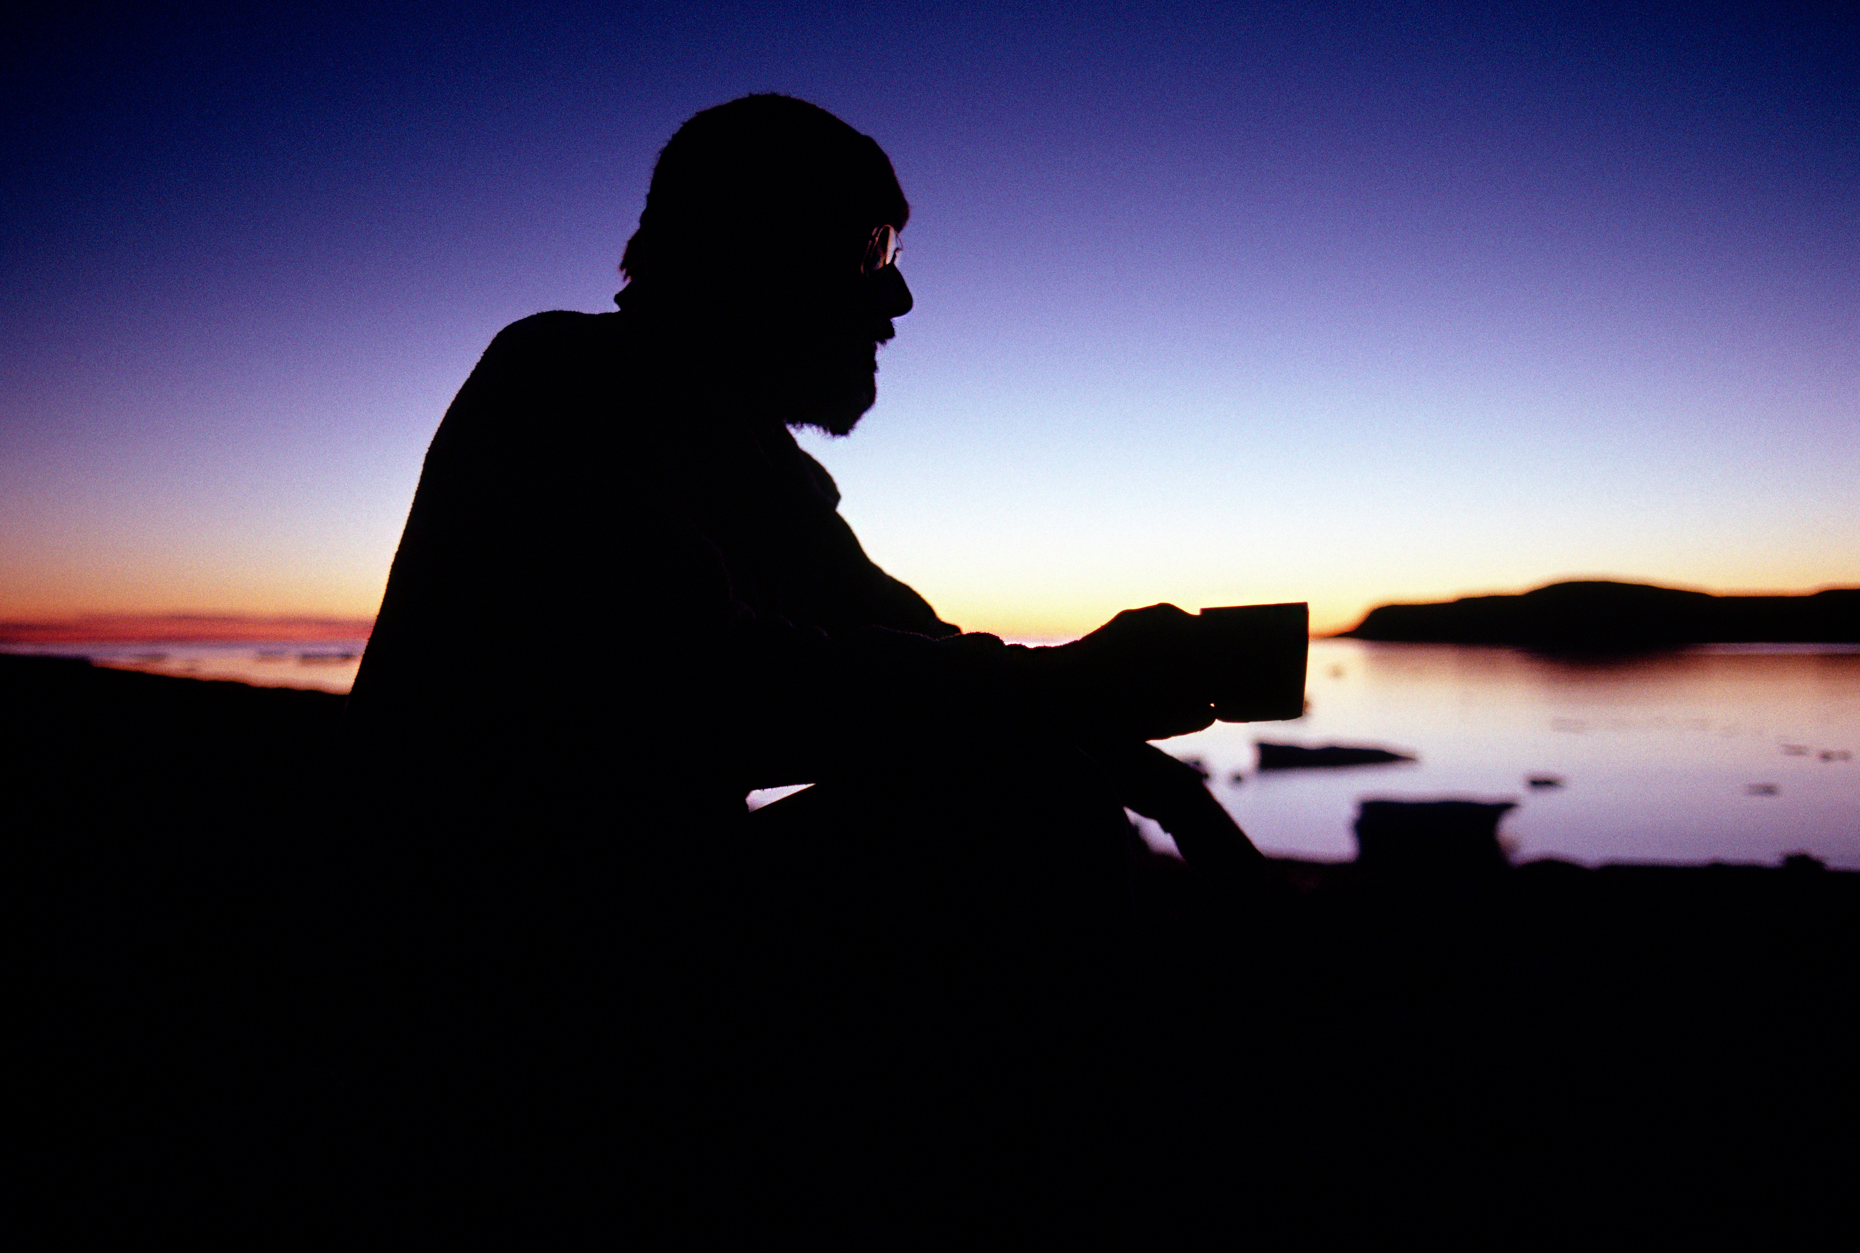 Male camper with beard silhouetted against an arctic sunset sky,